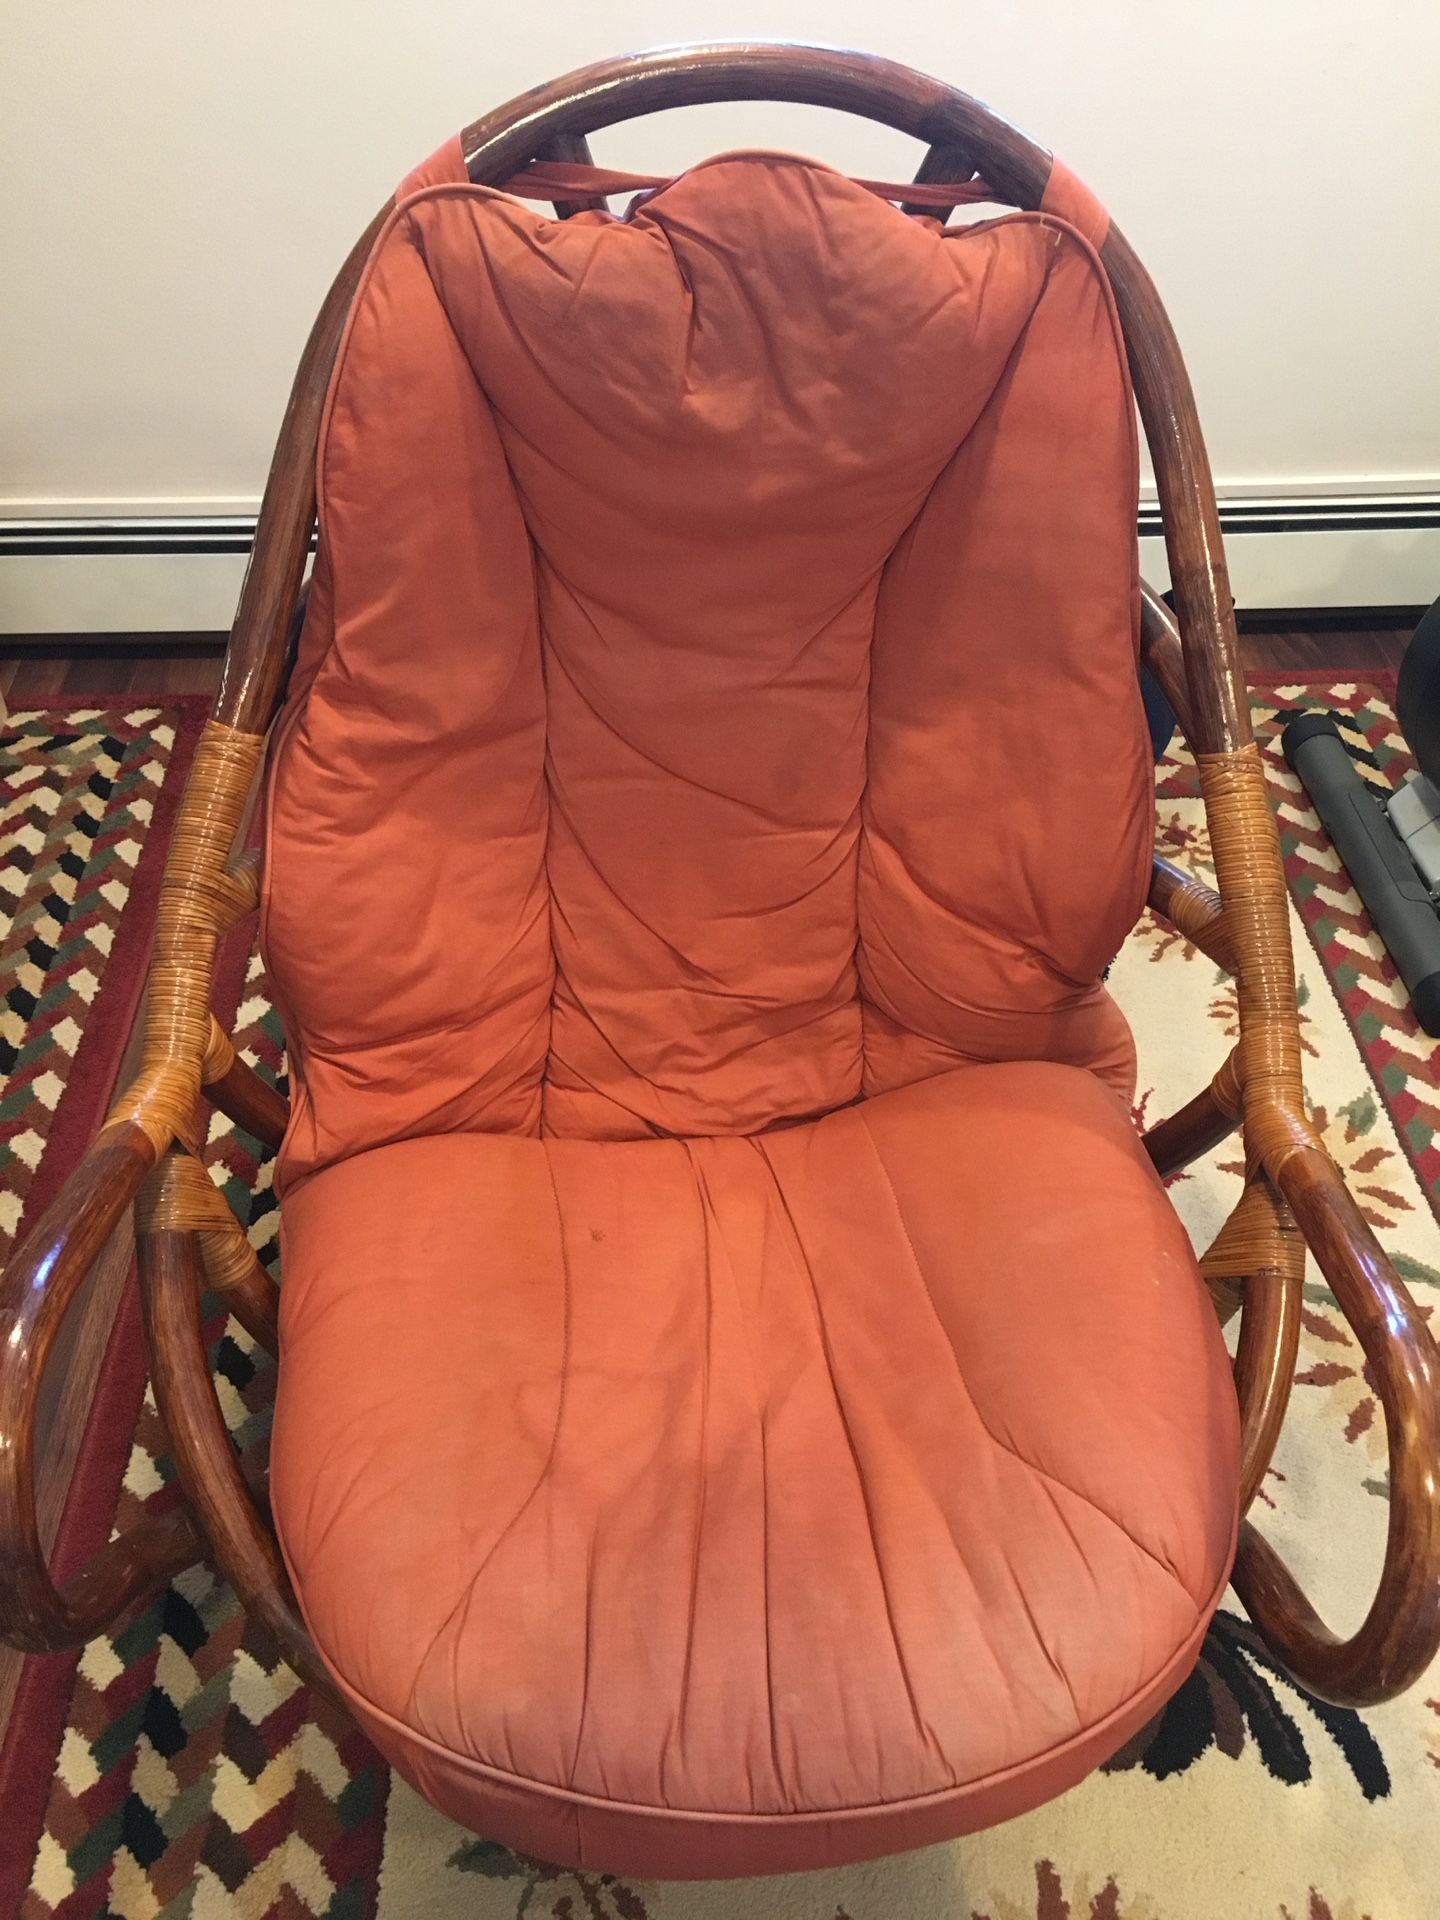 Two swivel chairs